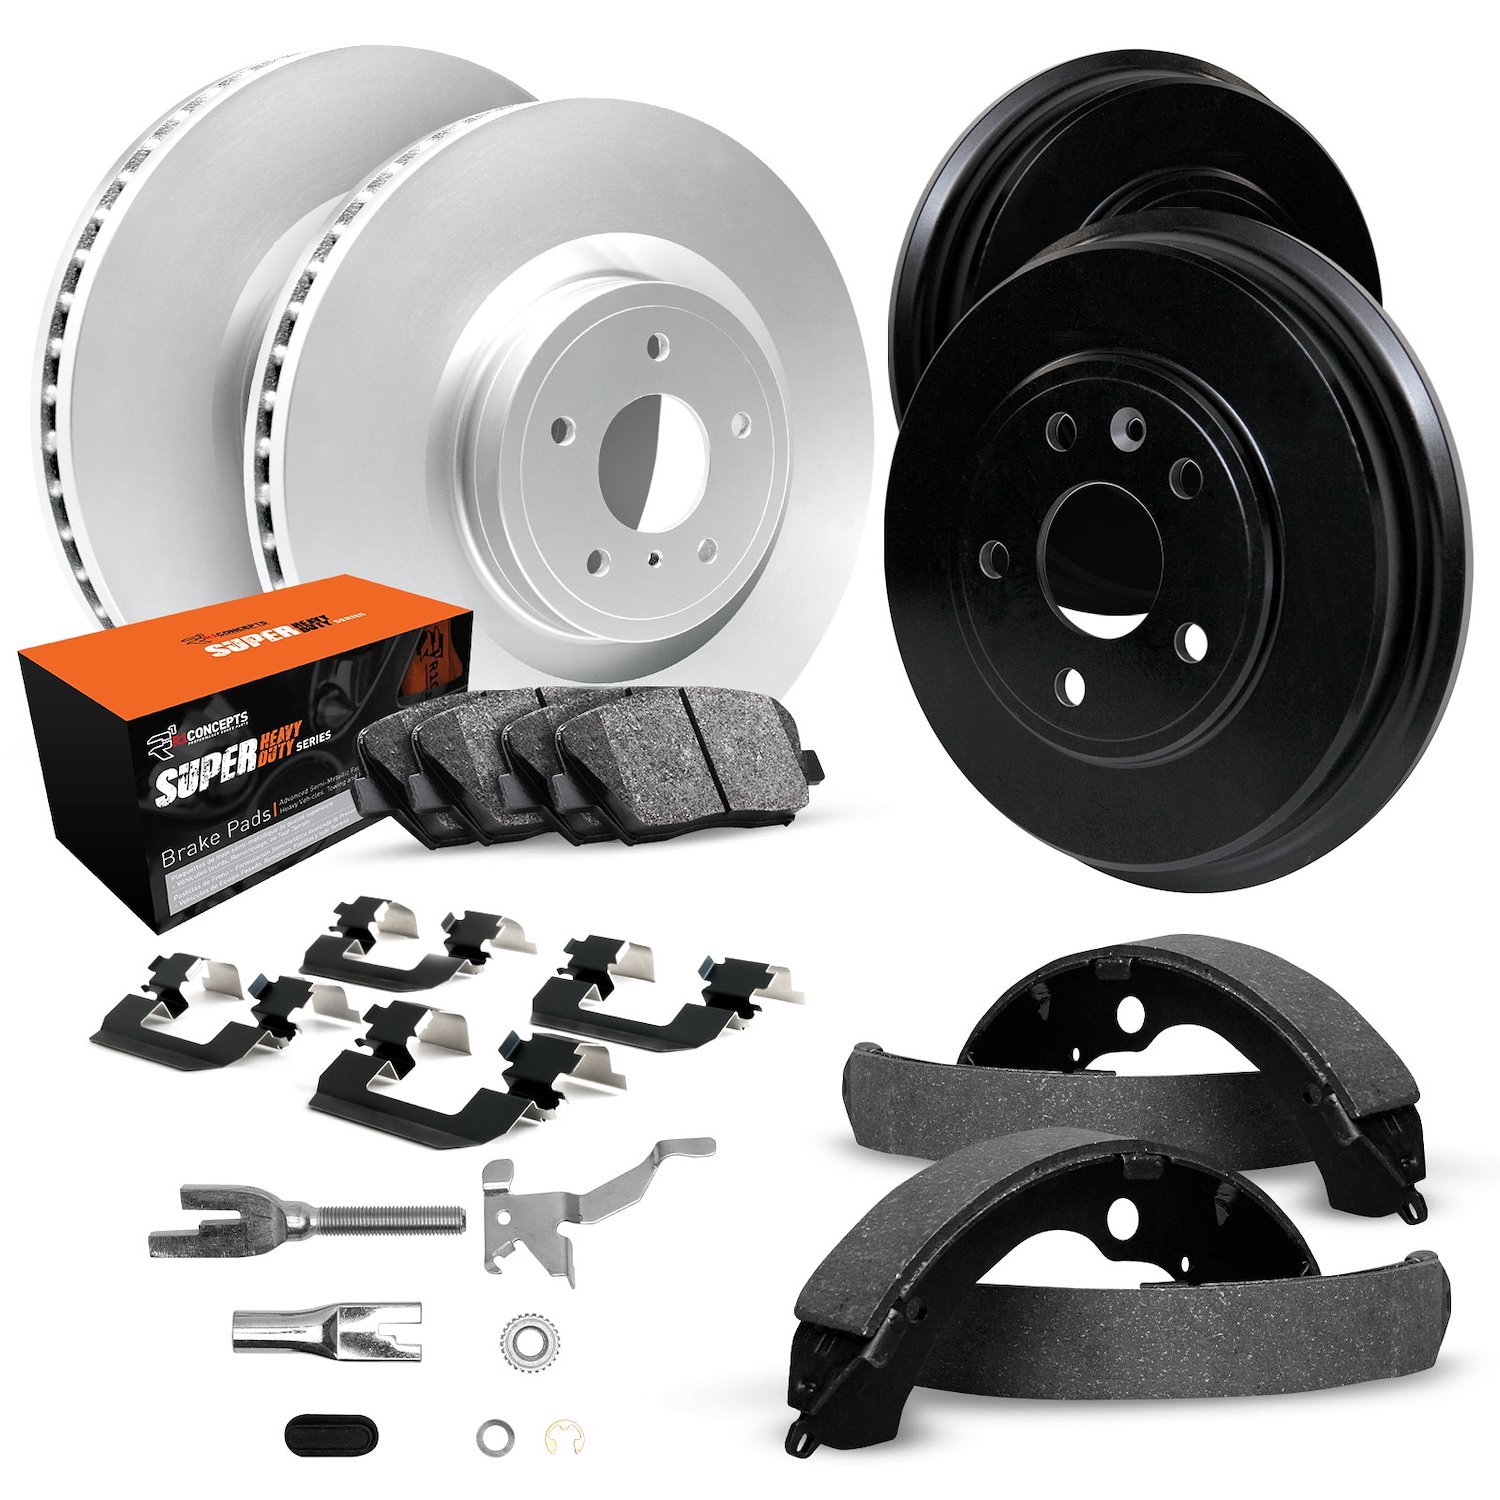 GEO-Carbon Brake Rotor & Drum Set w/Super-Duty Pads, Shoes, Hardware/Adjusters, 1979-1979 GM, Position: Front & Rear